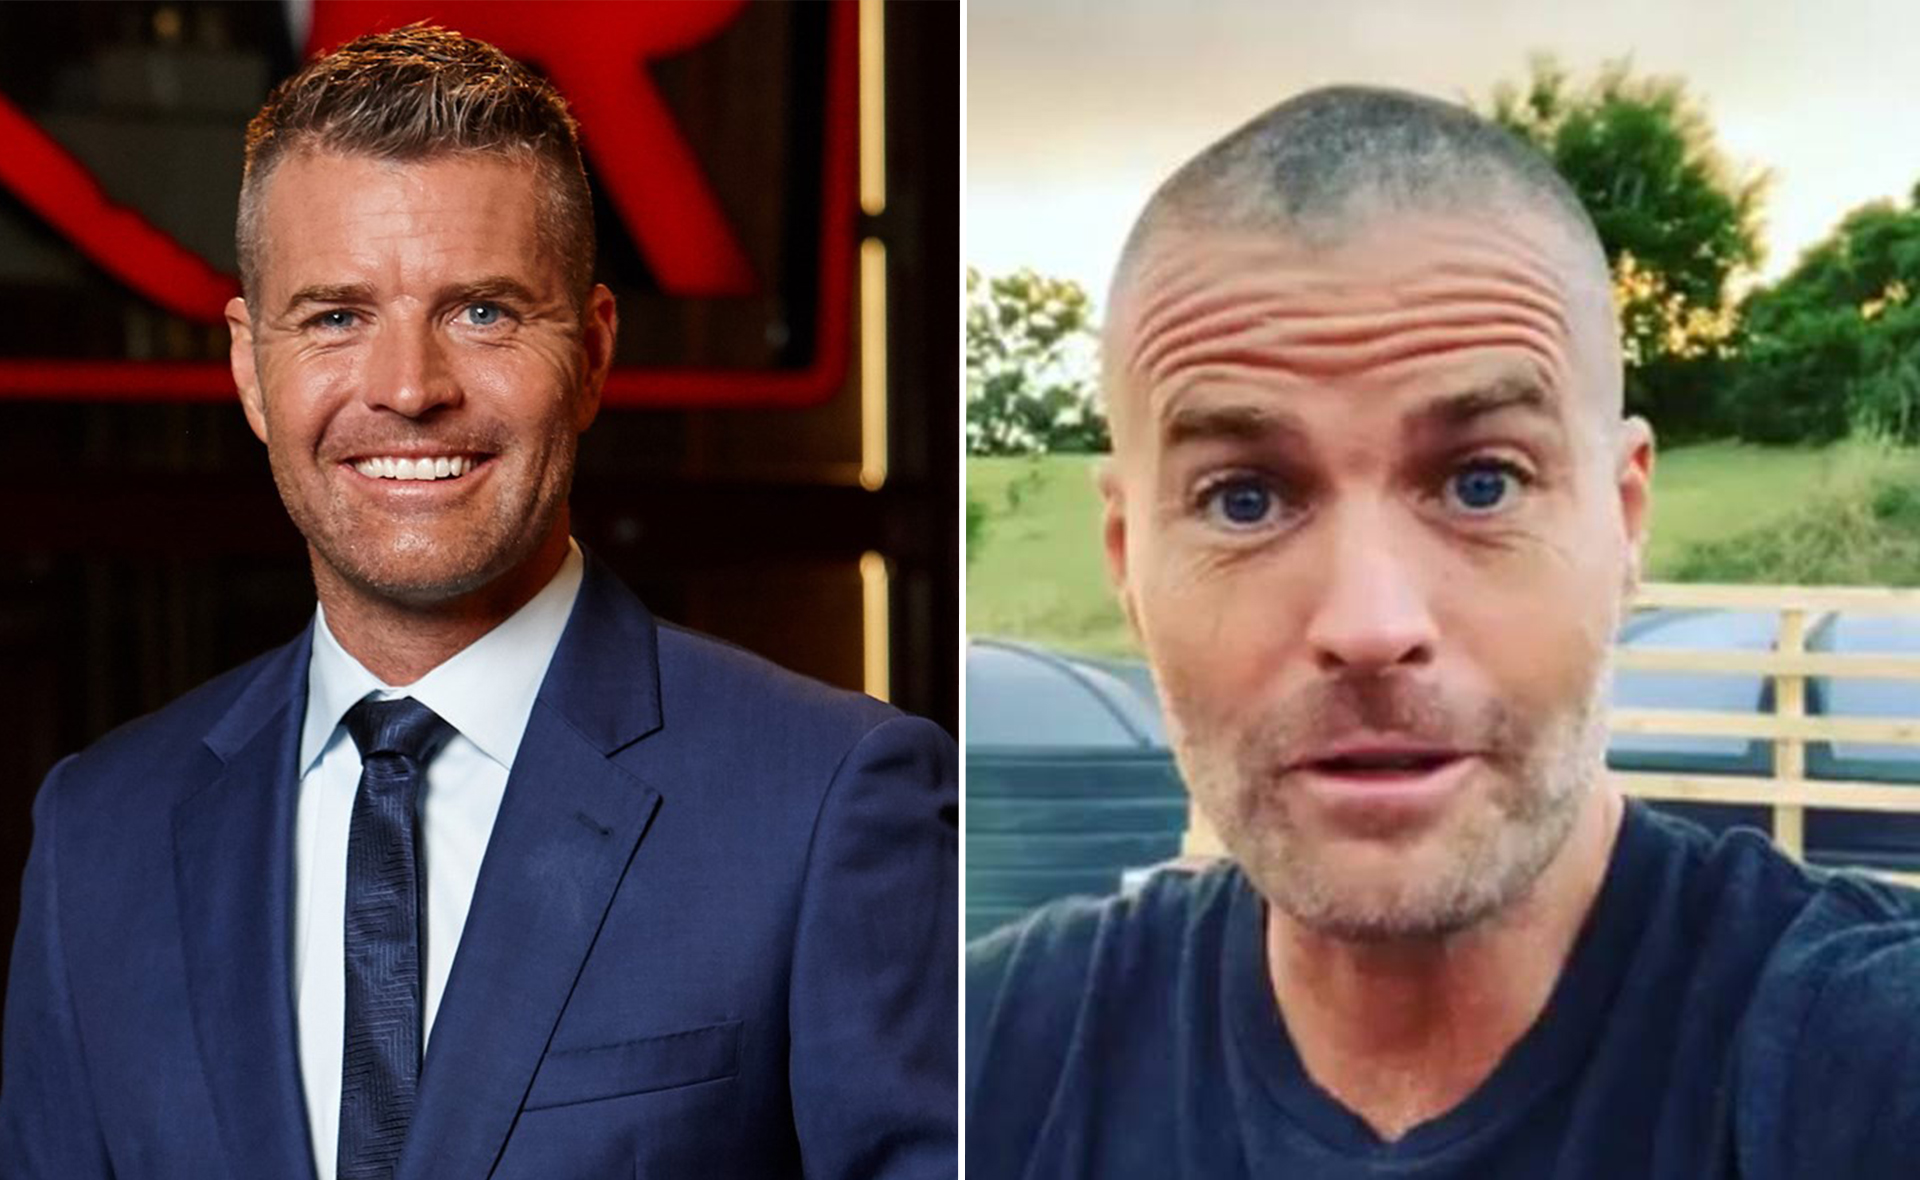 Three years after parting ways with My Kitchen Rules, Pete Evans’ new life continues to fascinate